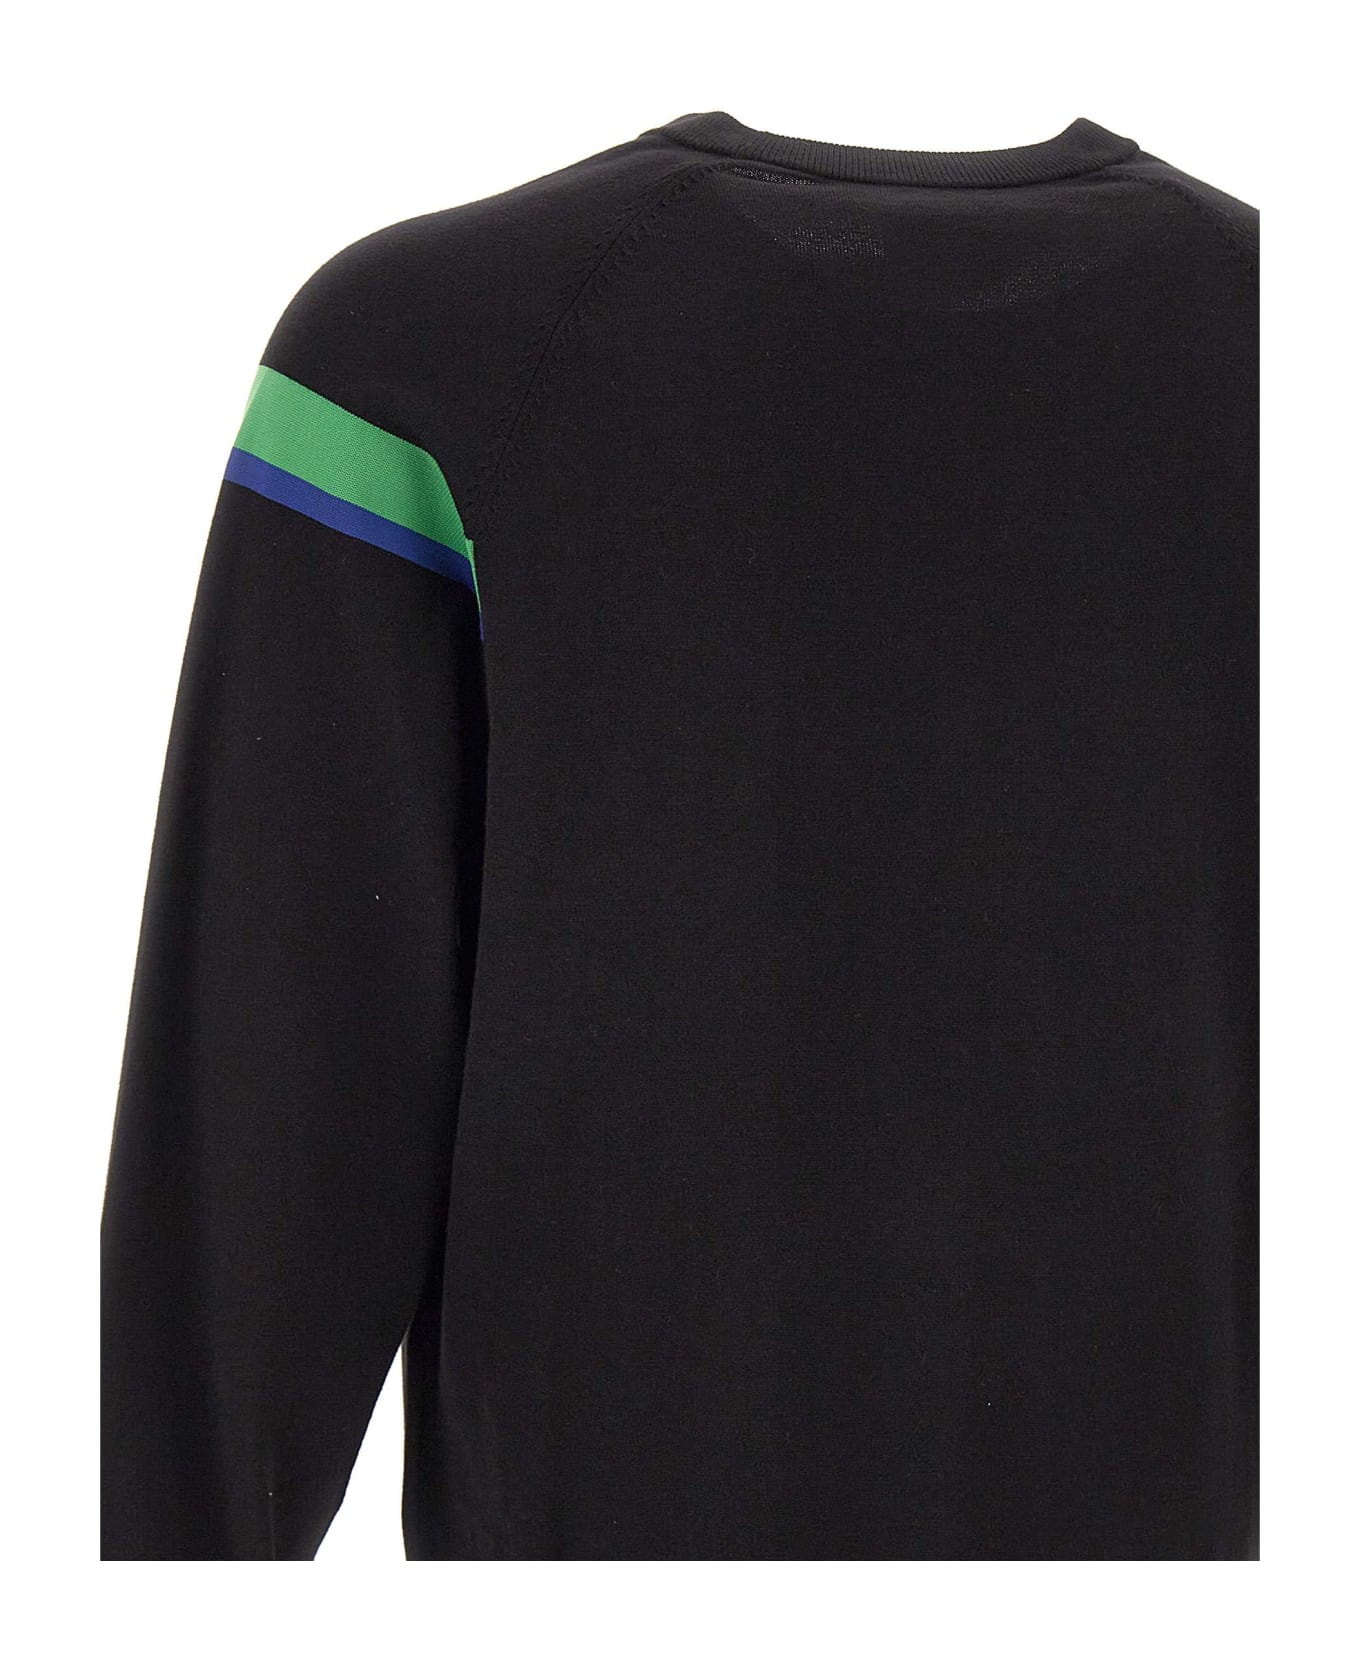 PS by Paul Smith Organic Cotton Sweater - BLACK